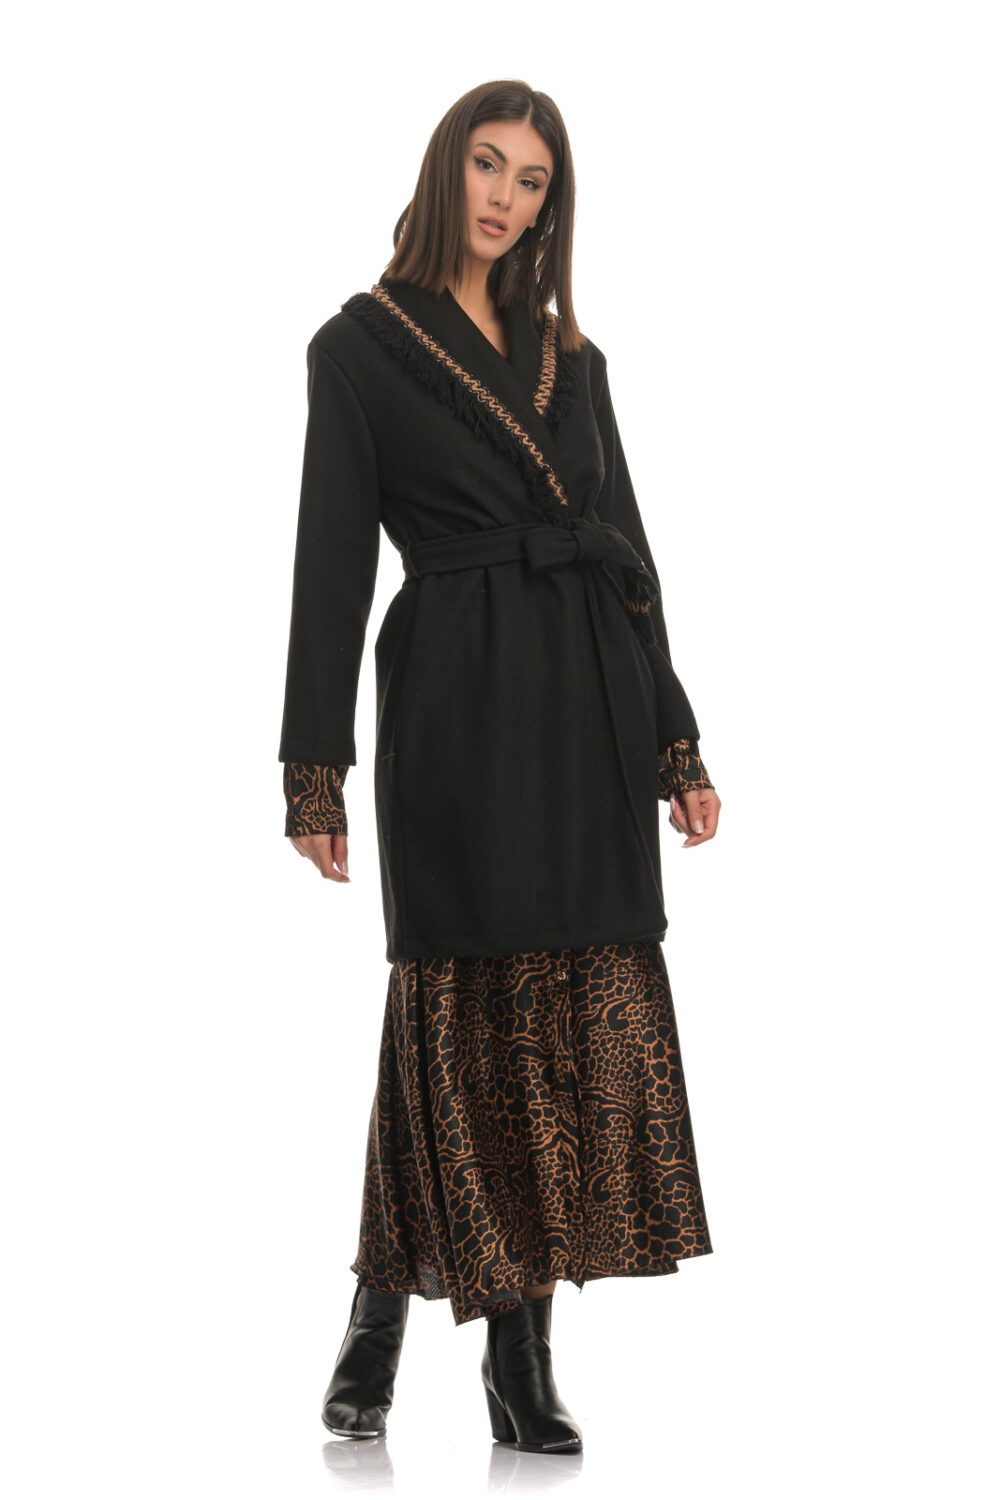 Black coat with belt and tassels at the end of the collar